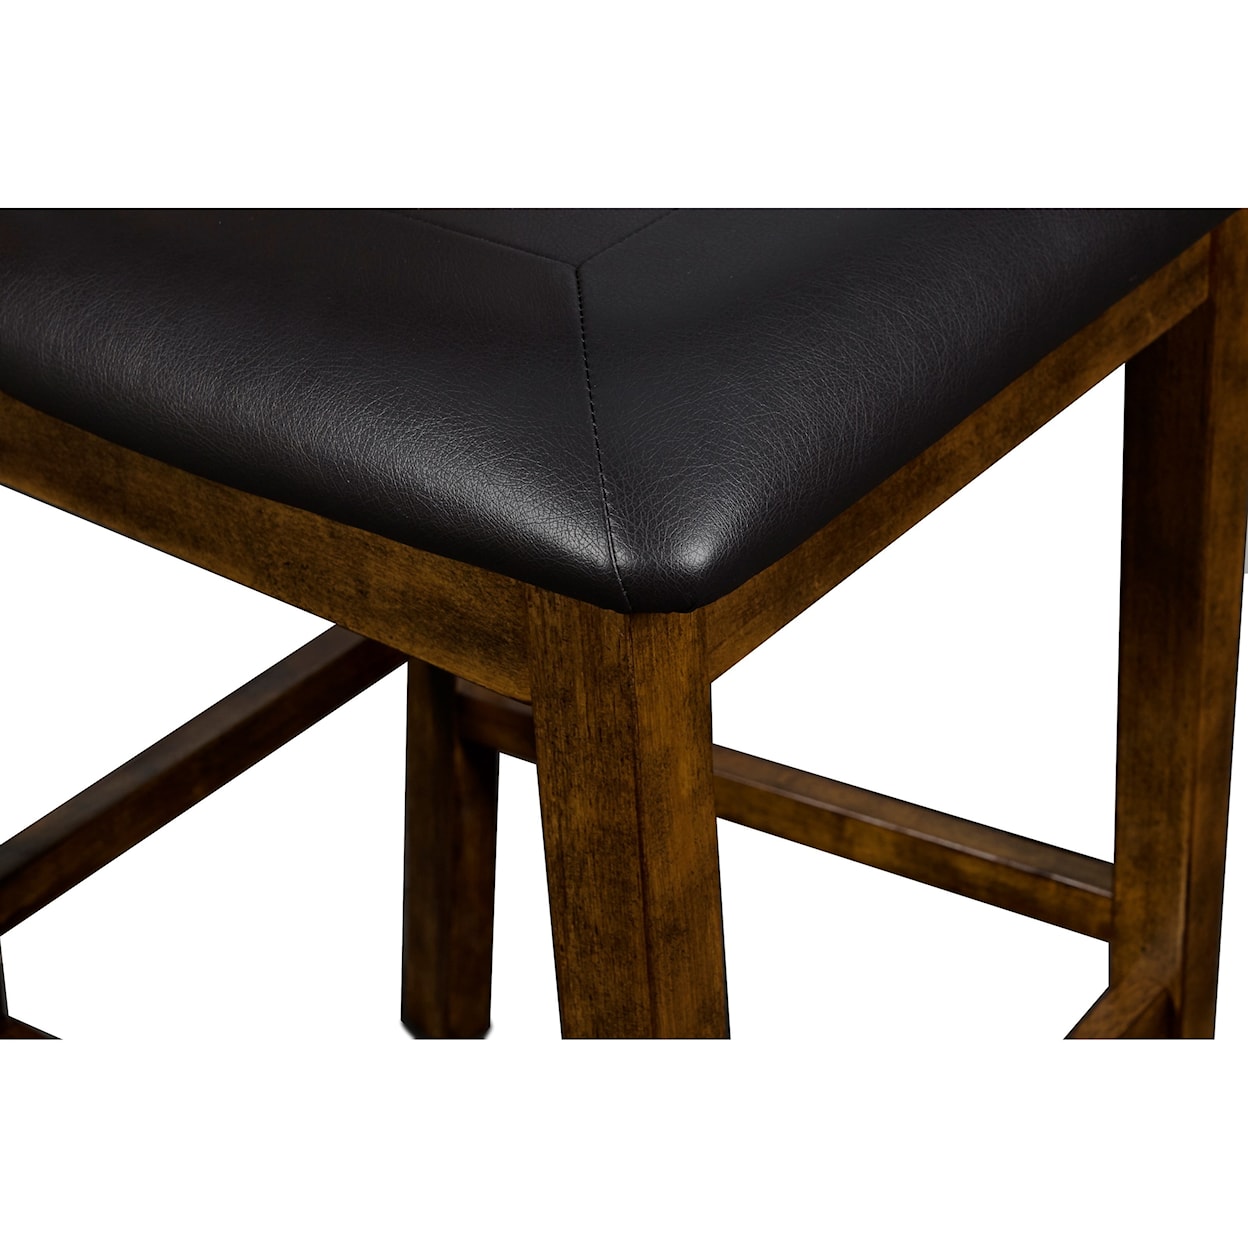 New Classic Furniture Gia Counter Chair